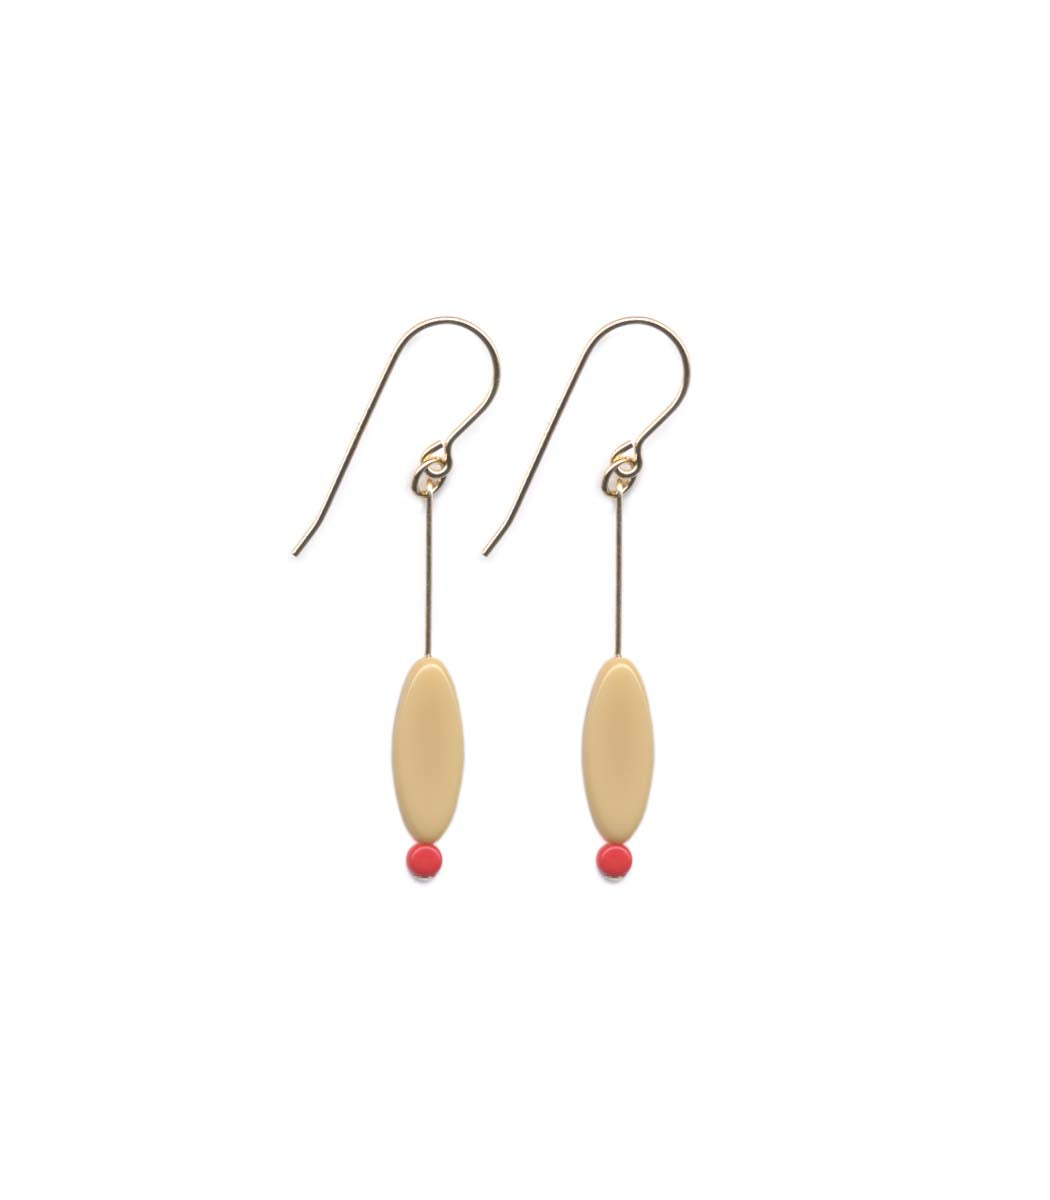 E1793 Cream Petal with Red Detail Earrings